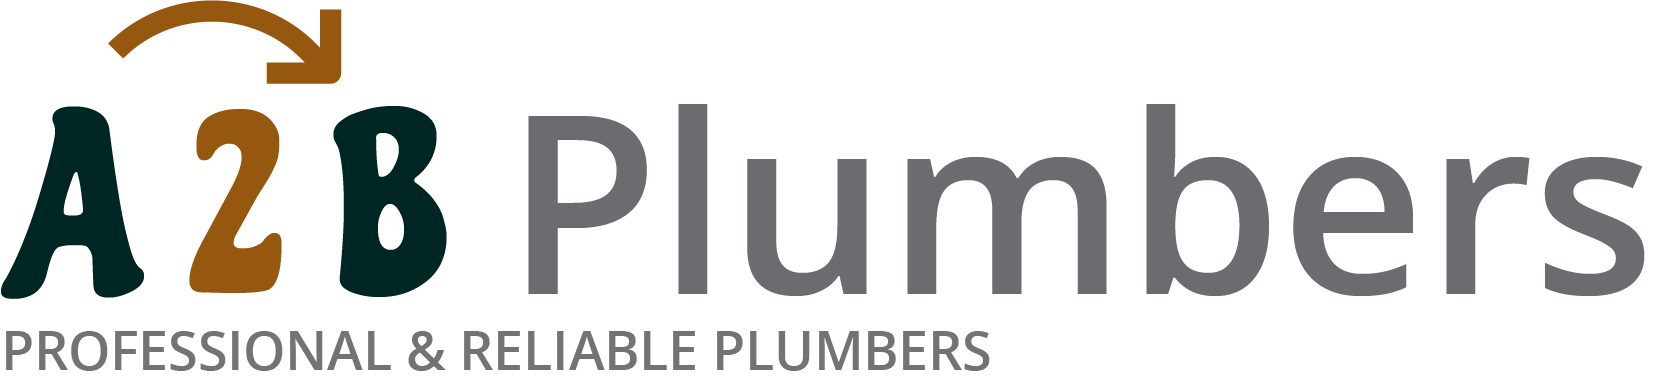 If you need a boiler installed, a radiator repaired or a leaking tap fixed, call us now - we provide services for properties in Crouch End and the local area.